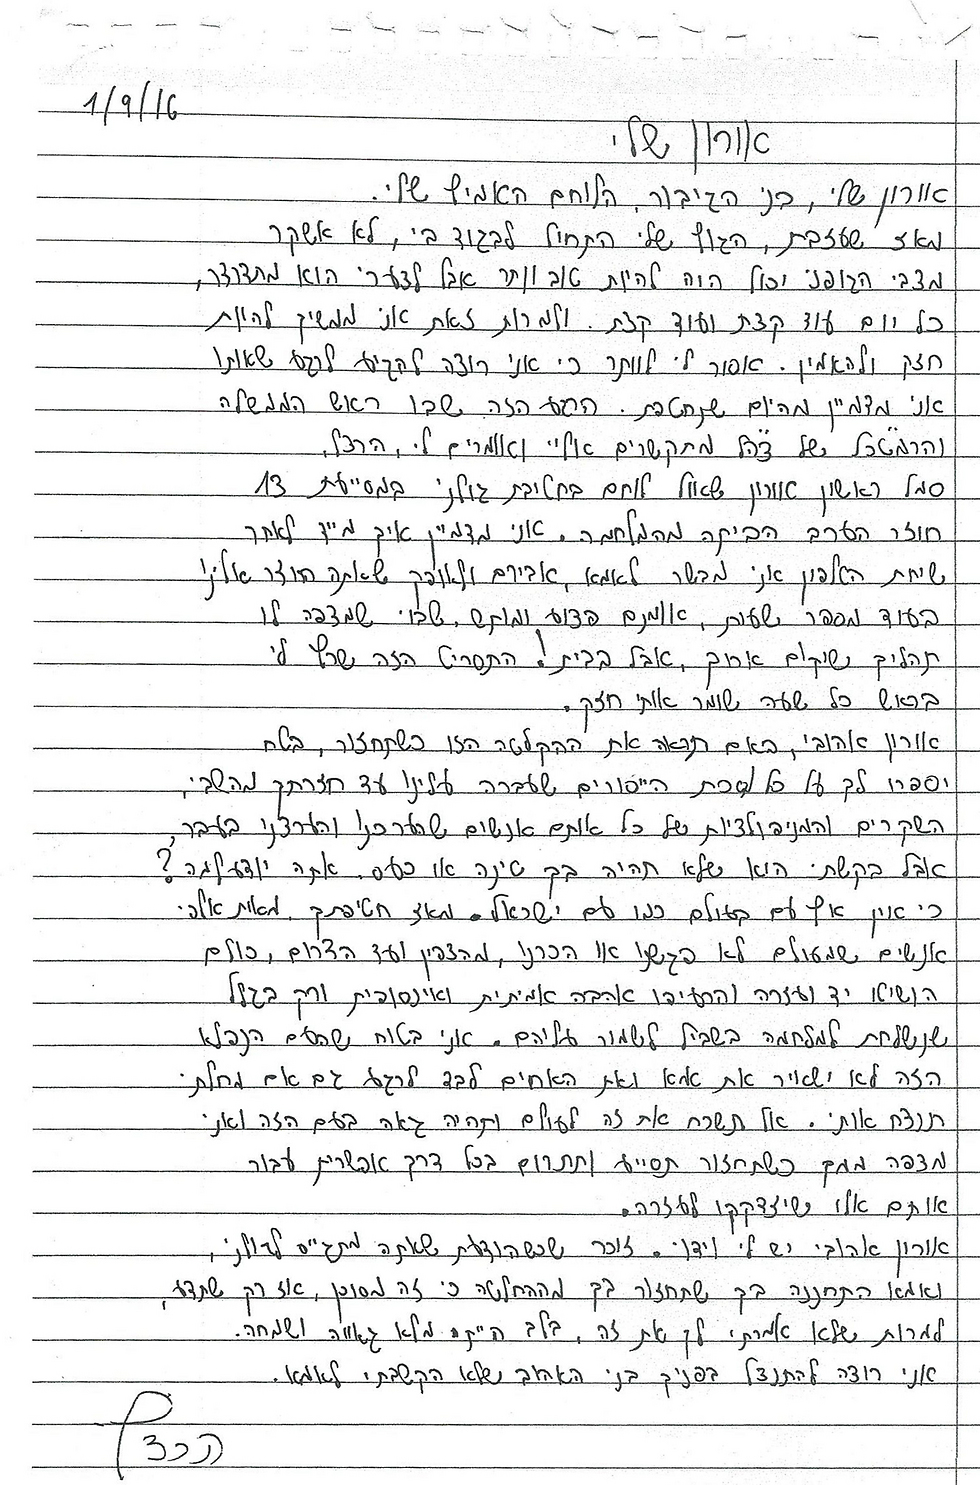 Herzl Shaul's final letter to his fallen son.